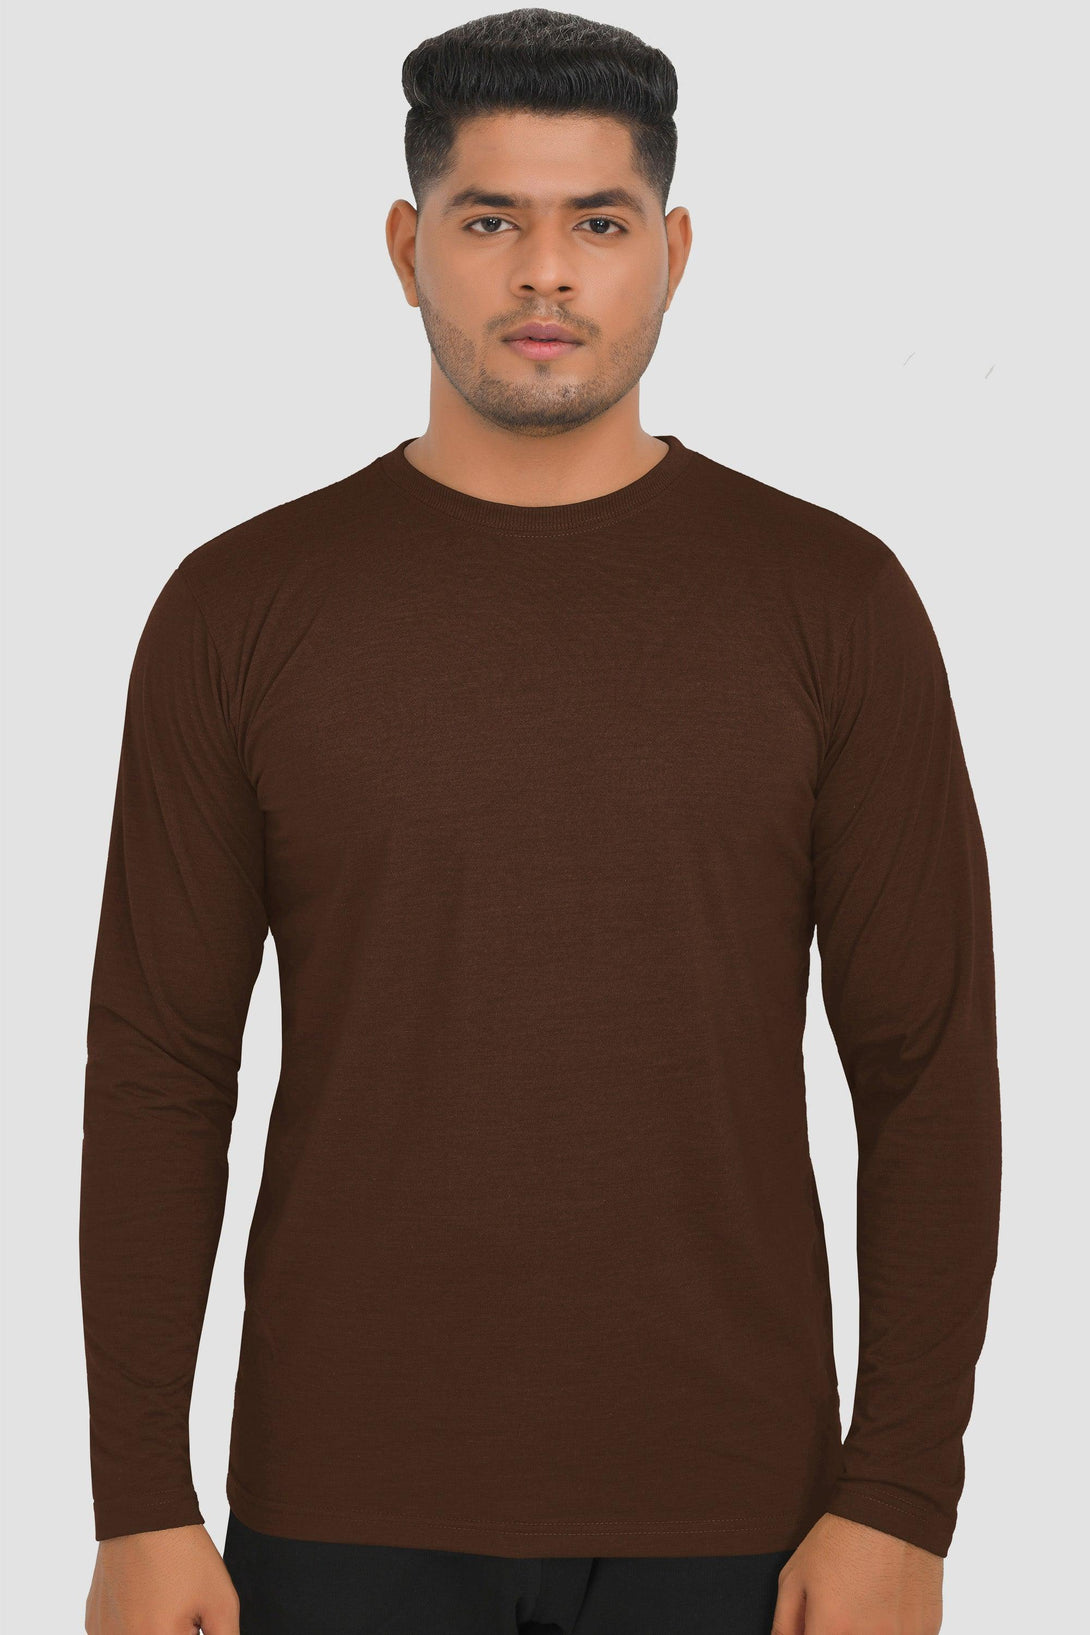 Long Sleeve Round Neck T-Shirts | DARK GREY - CHARCHAOL - CHOCOLATE - MUSTARD - FTS